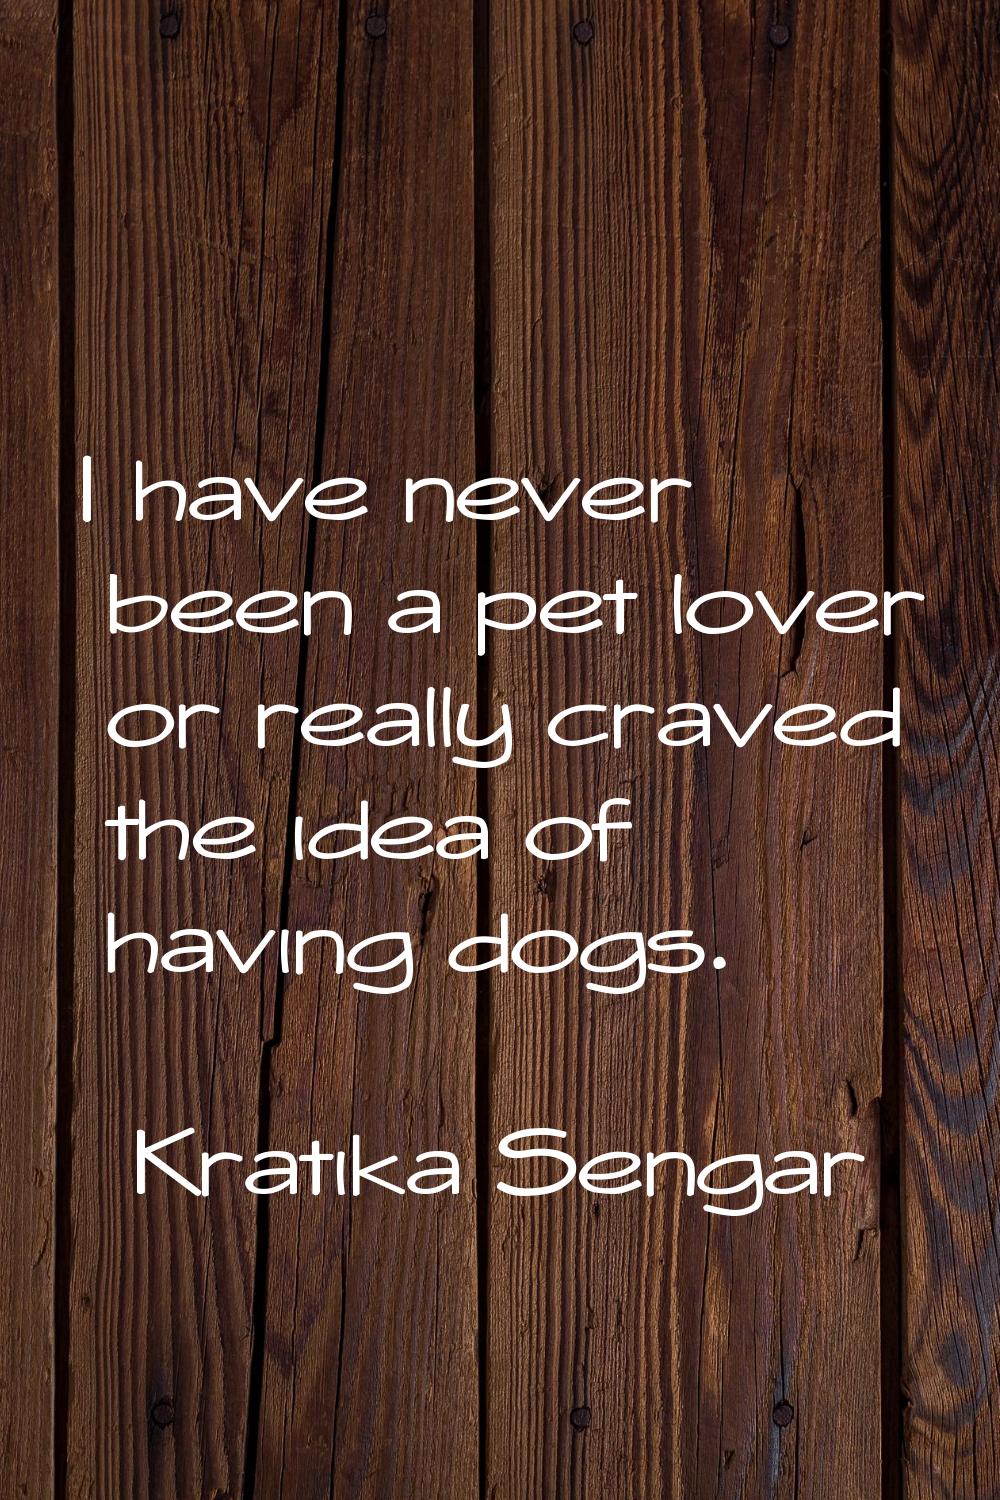 I have never been a pet lover or really craved the idea of having dogs.